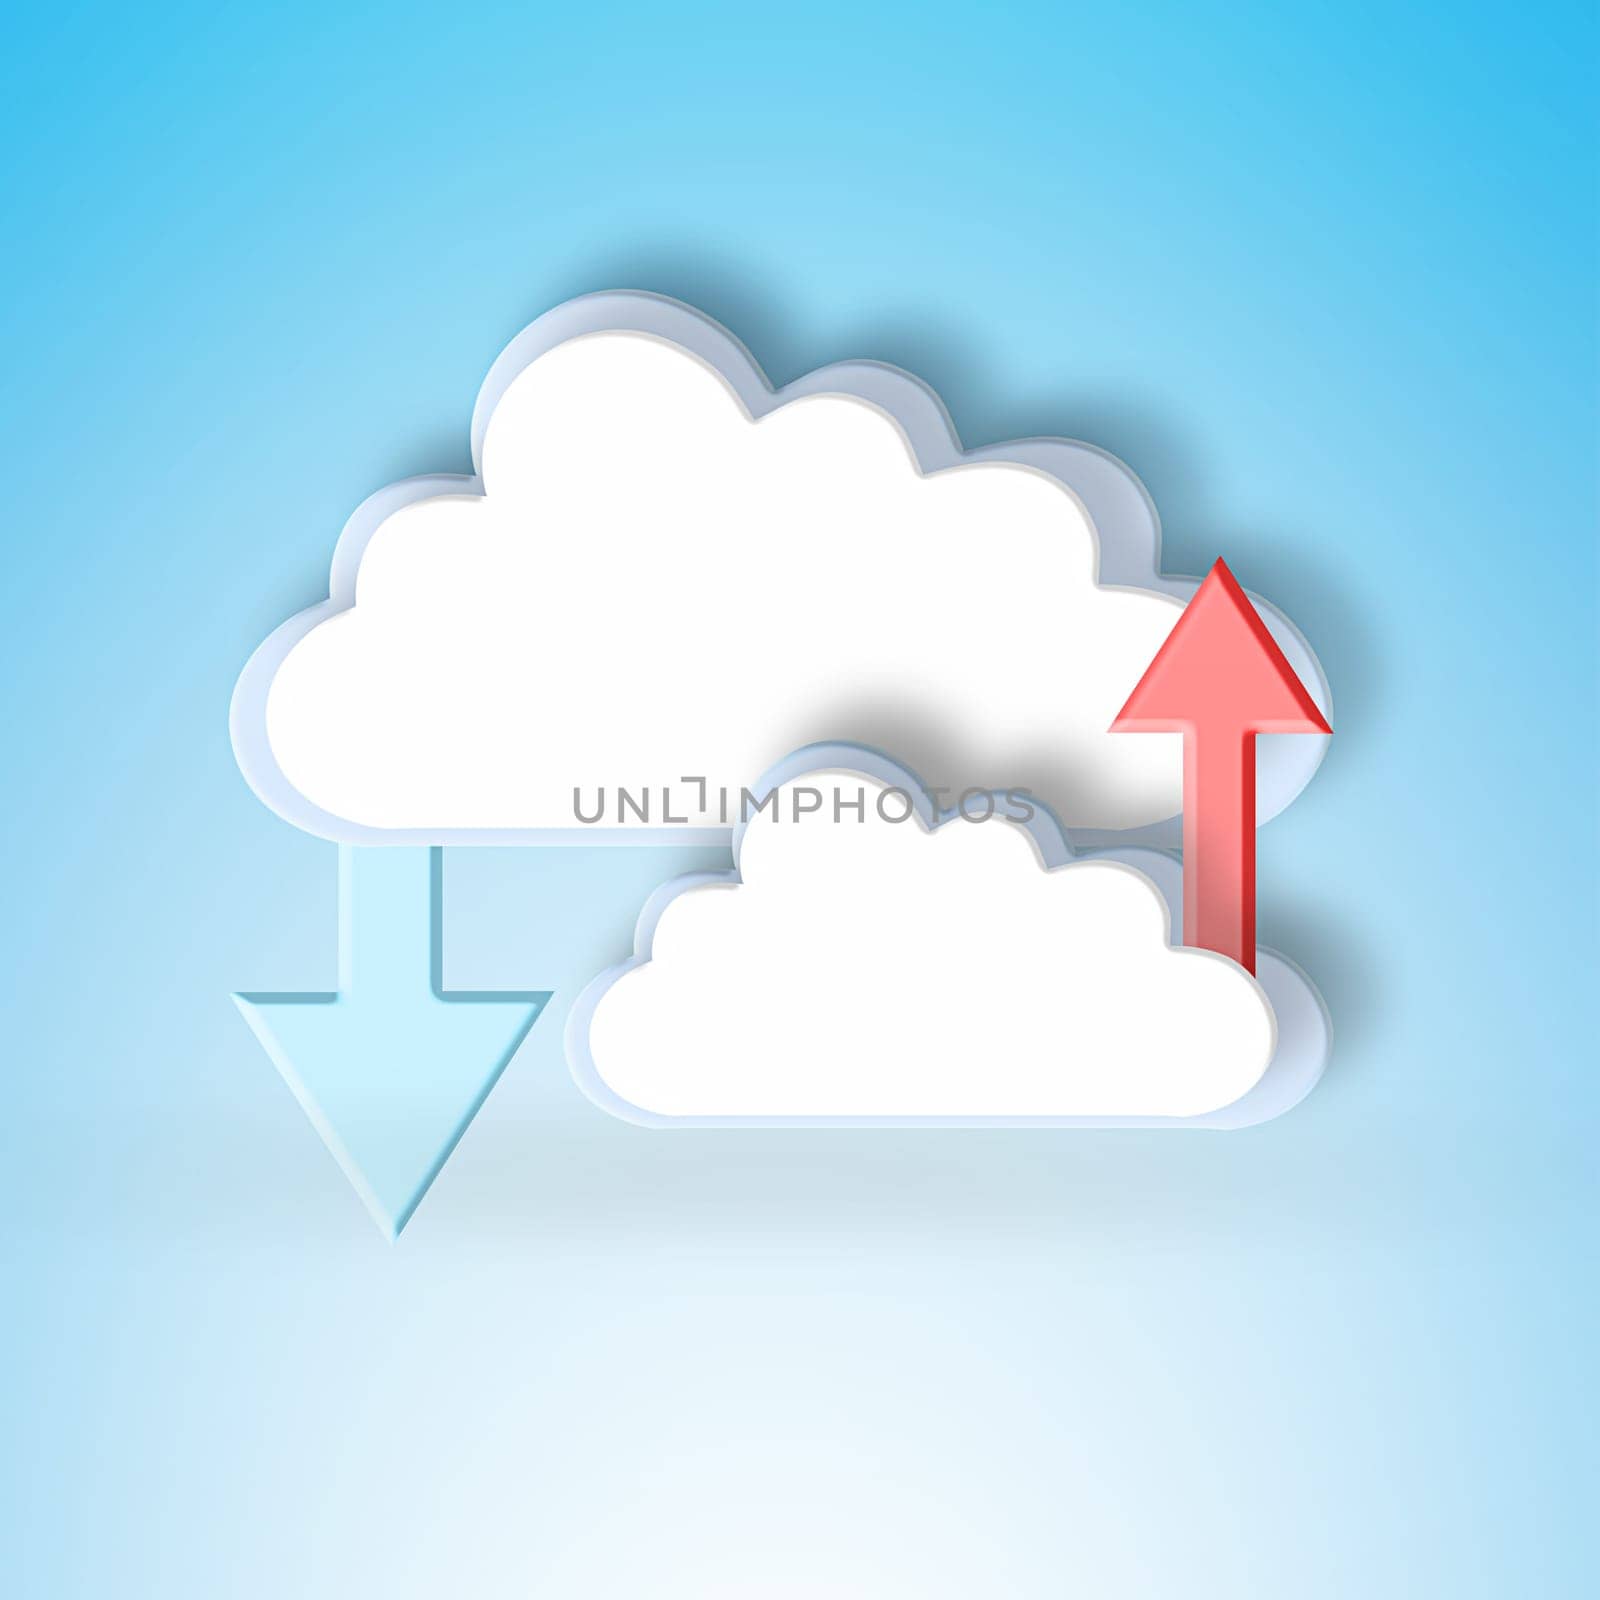 Cloud computing, graphic and arrow for download for data science, information technology and art on blue background. Networking, storage icon and futuristic it for digital expansion with upload sign.